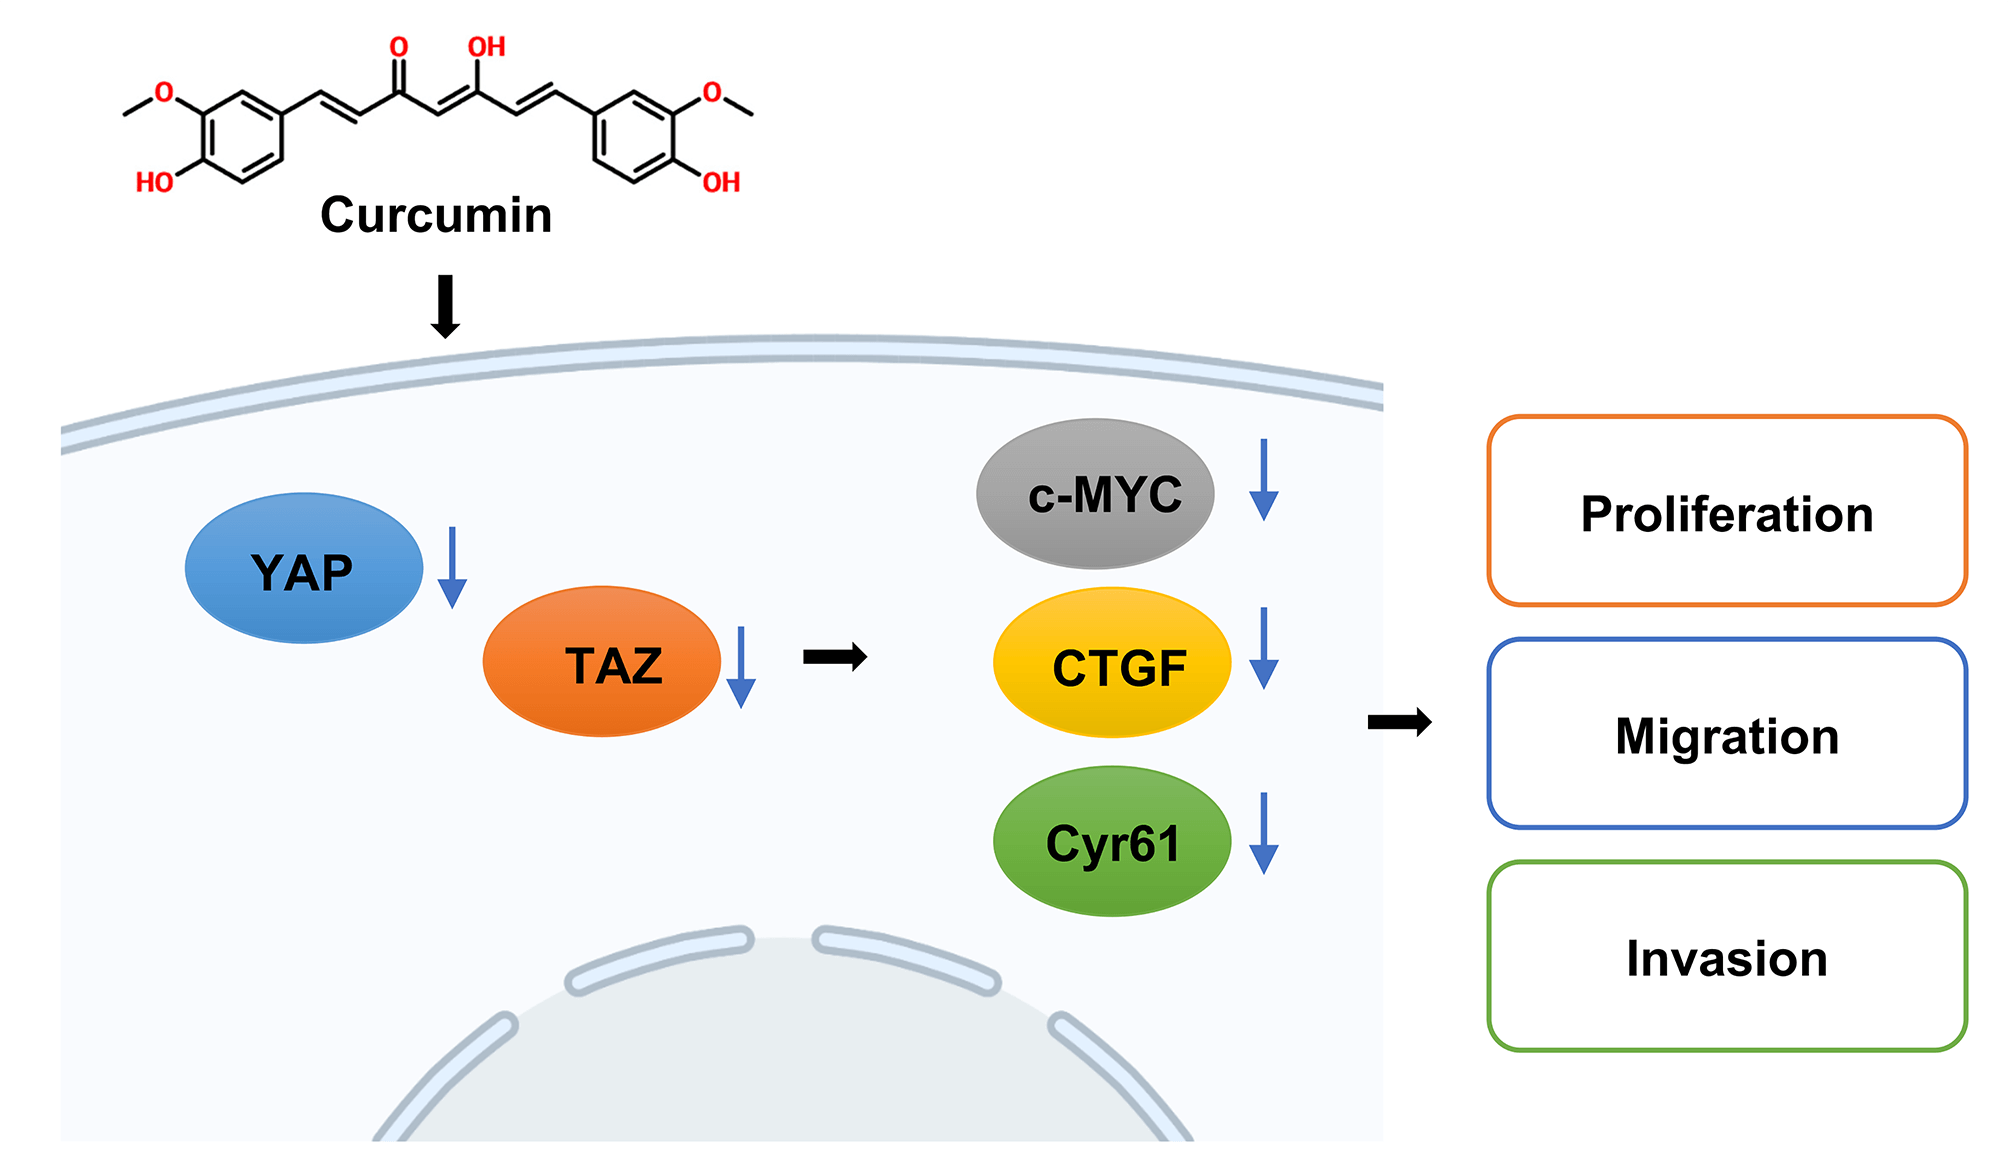 Curcumin inhibits colorectal cancer development by blocking the YAP/TAZ signaling axis